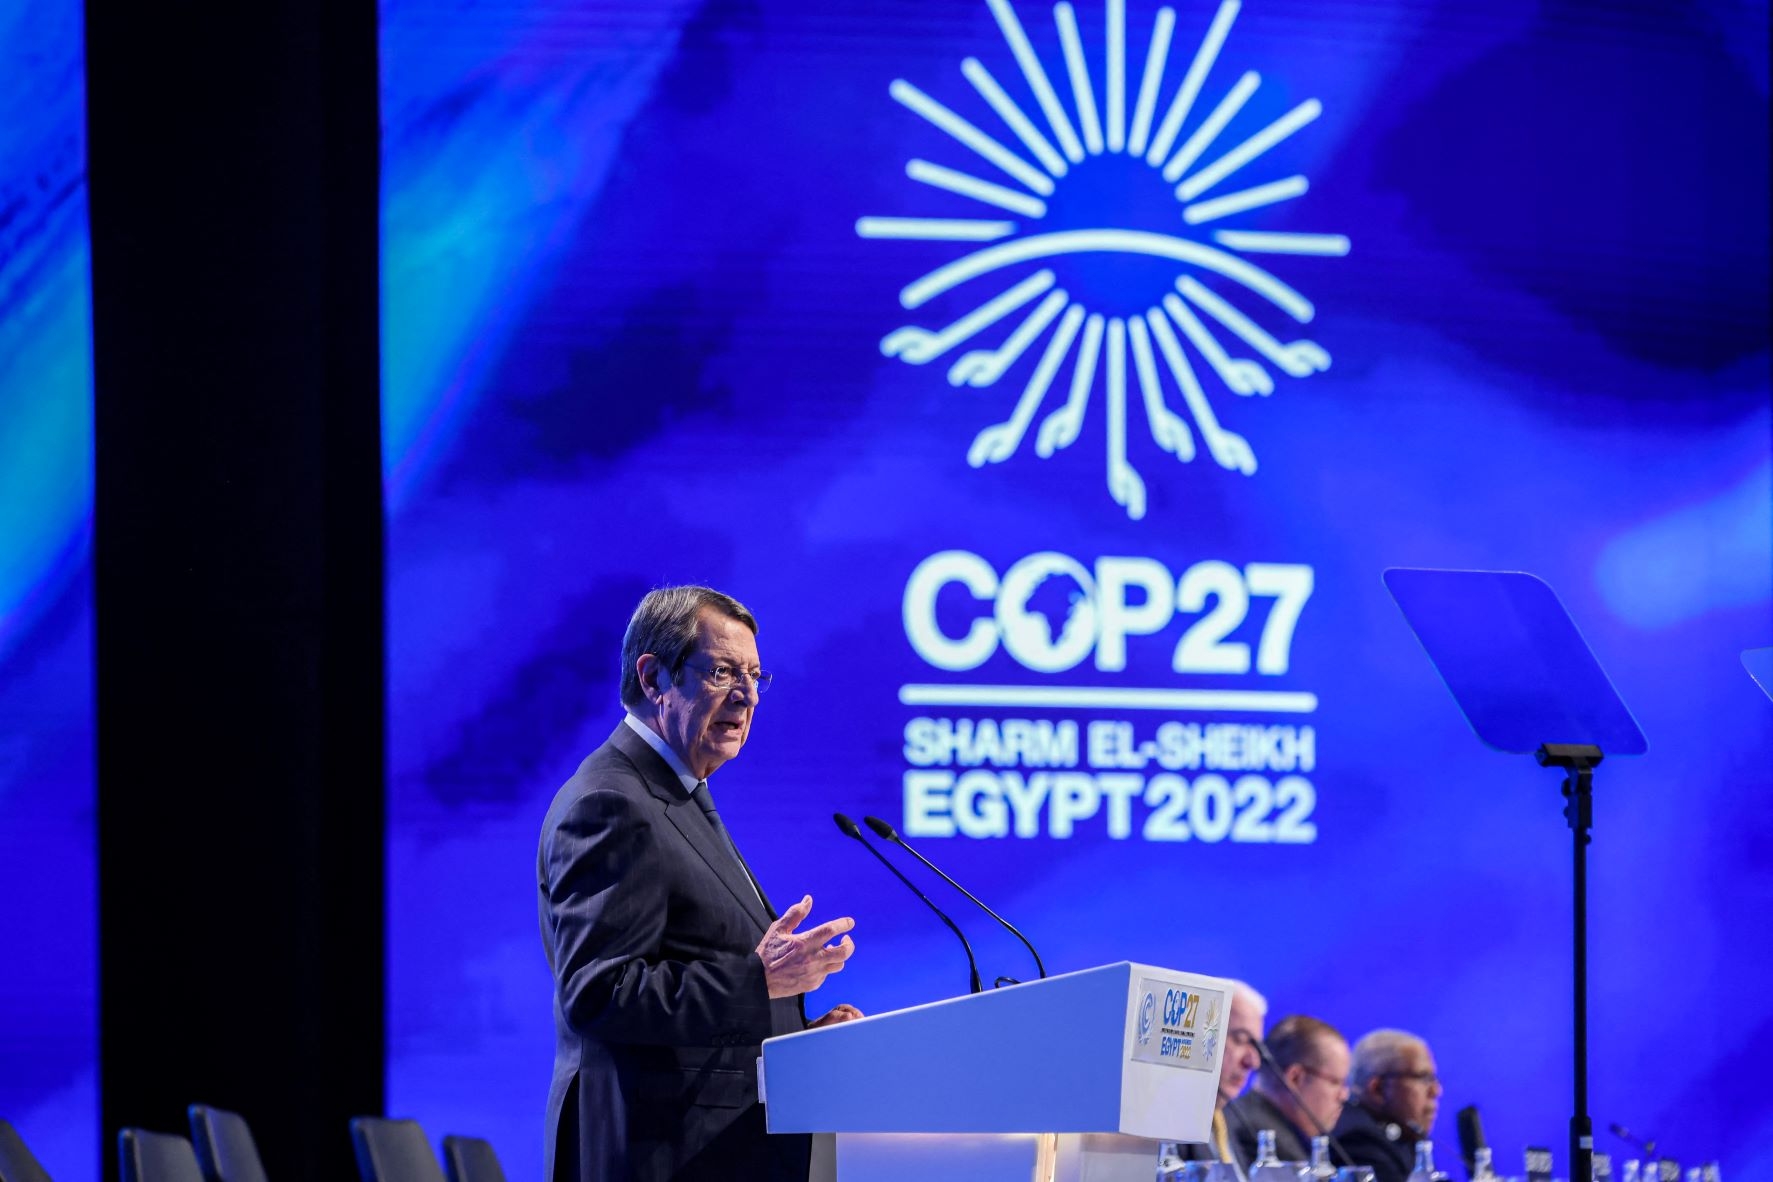 Cyprus' President Nicos Anastasiades delivers a speech at the leaders summit of the COP27 climate conference at the Sharm el-Sheikh International Convention Centre, in Egypt's Red Sea resort city of the same name, on November 8, 2022 (AFP)